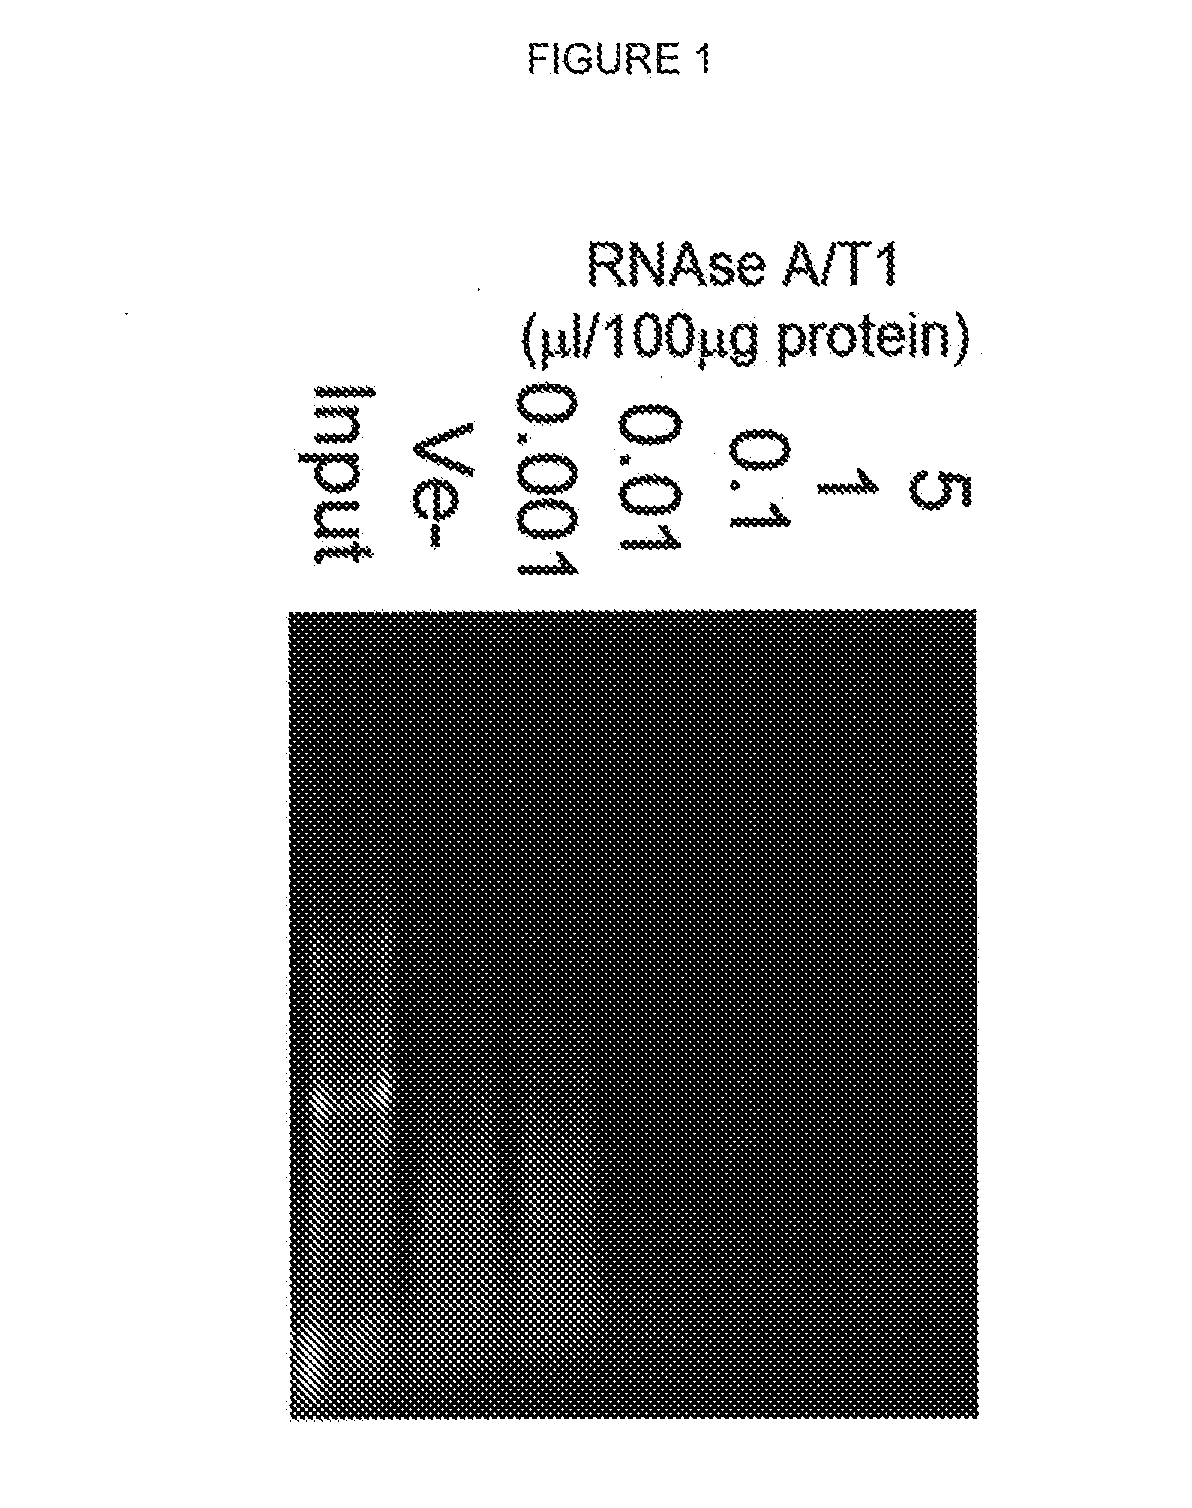 Use of RNA removal to initiate protein aggregation